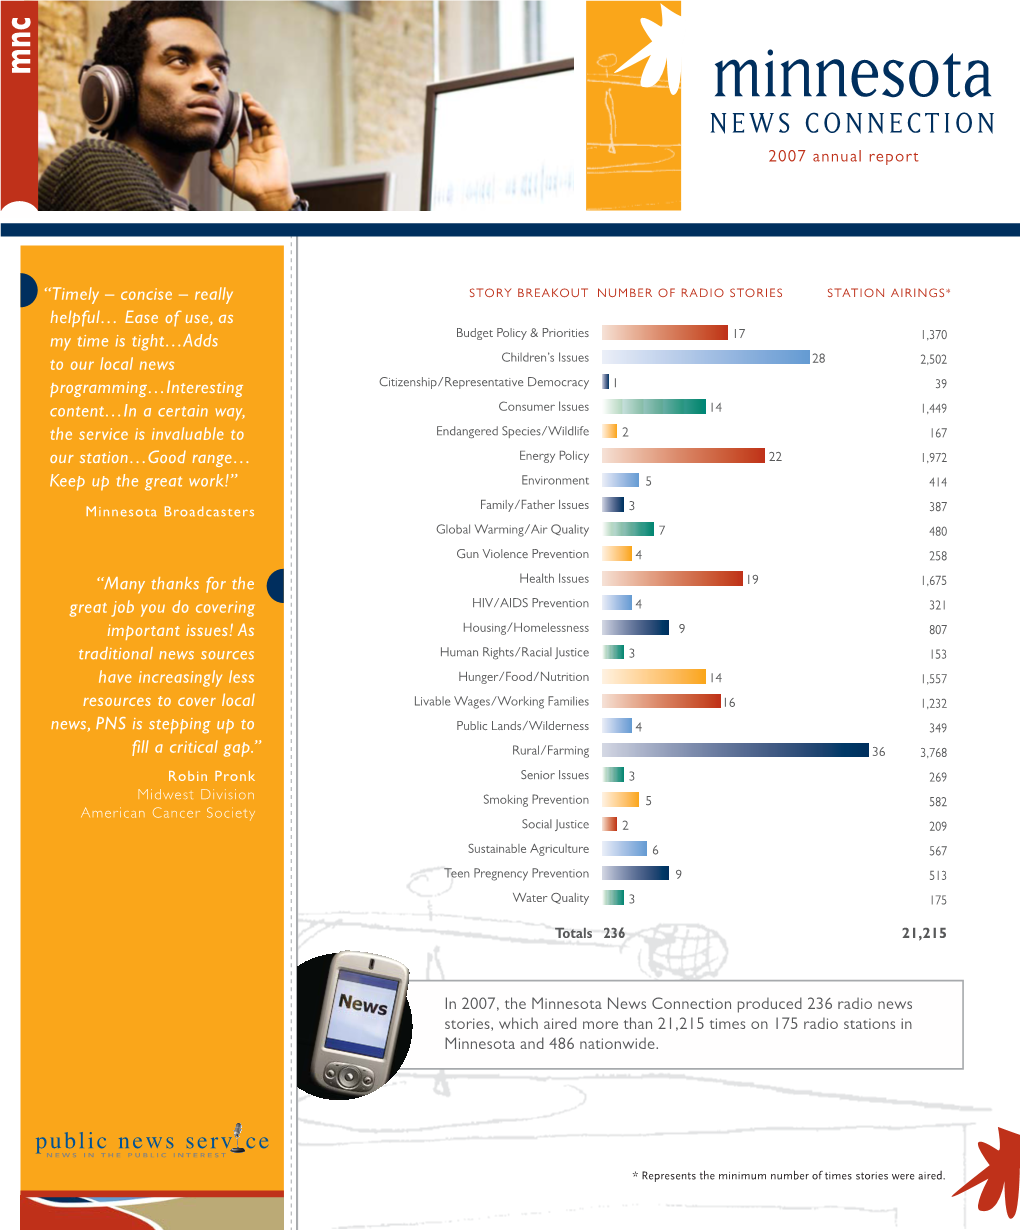 Minnesota NEWS CONNECTION 2007 Annual Report